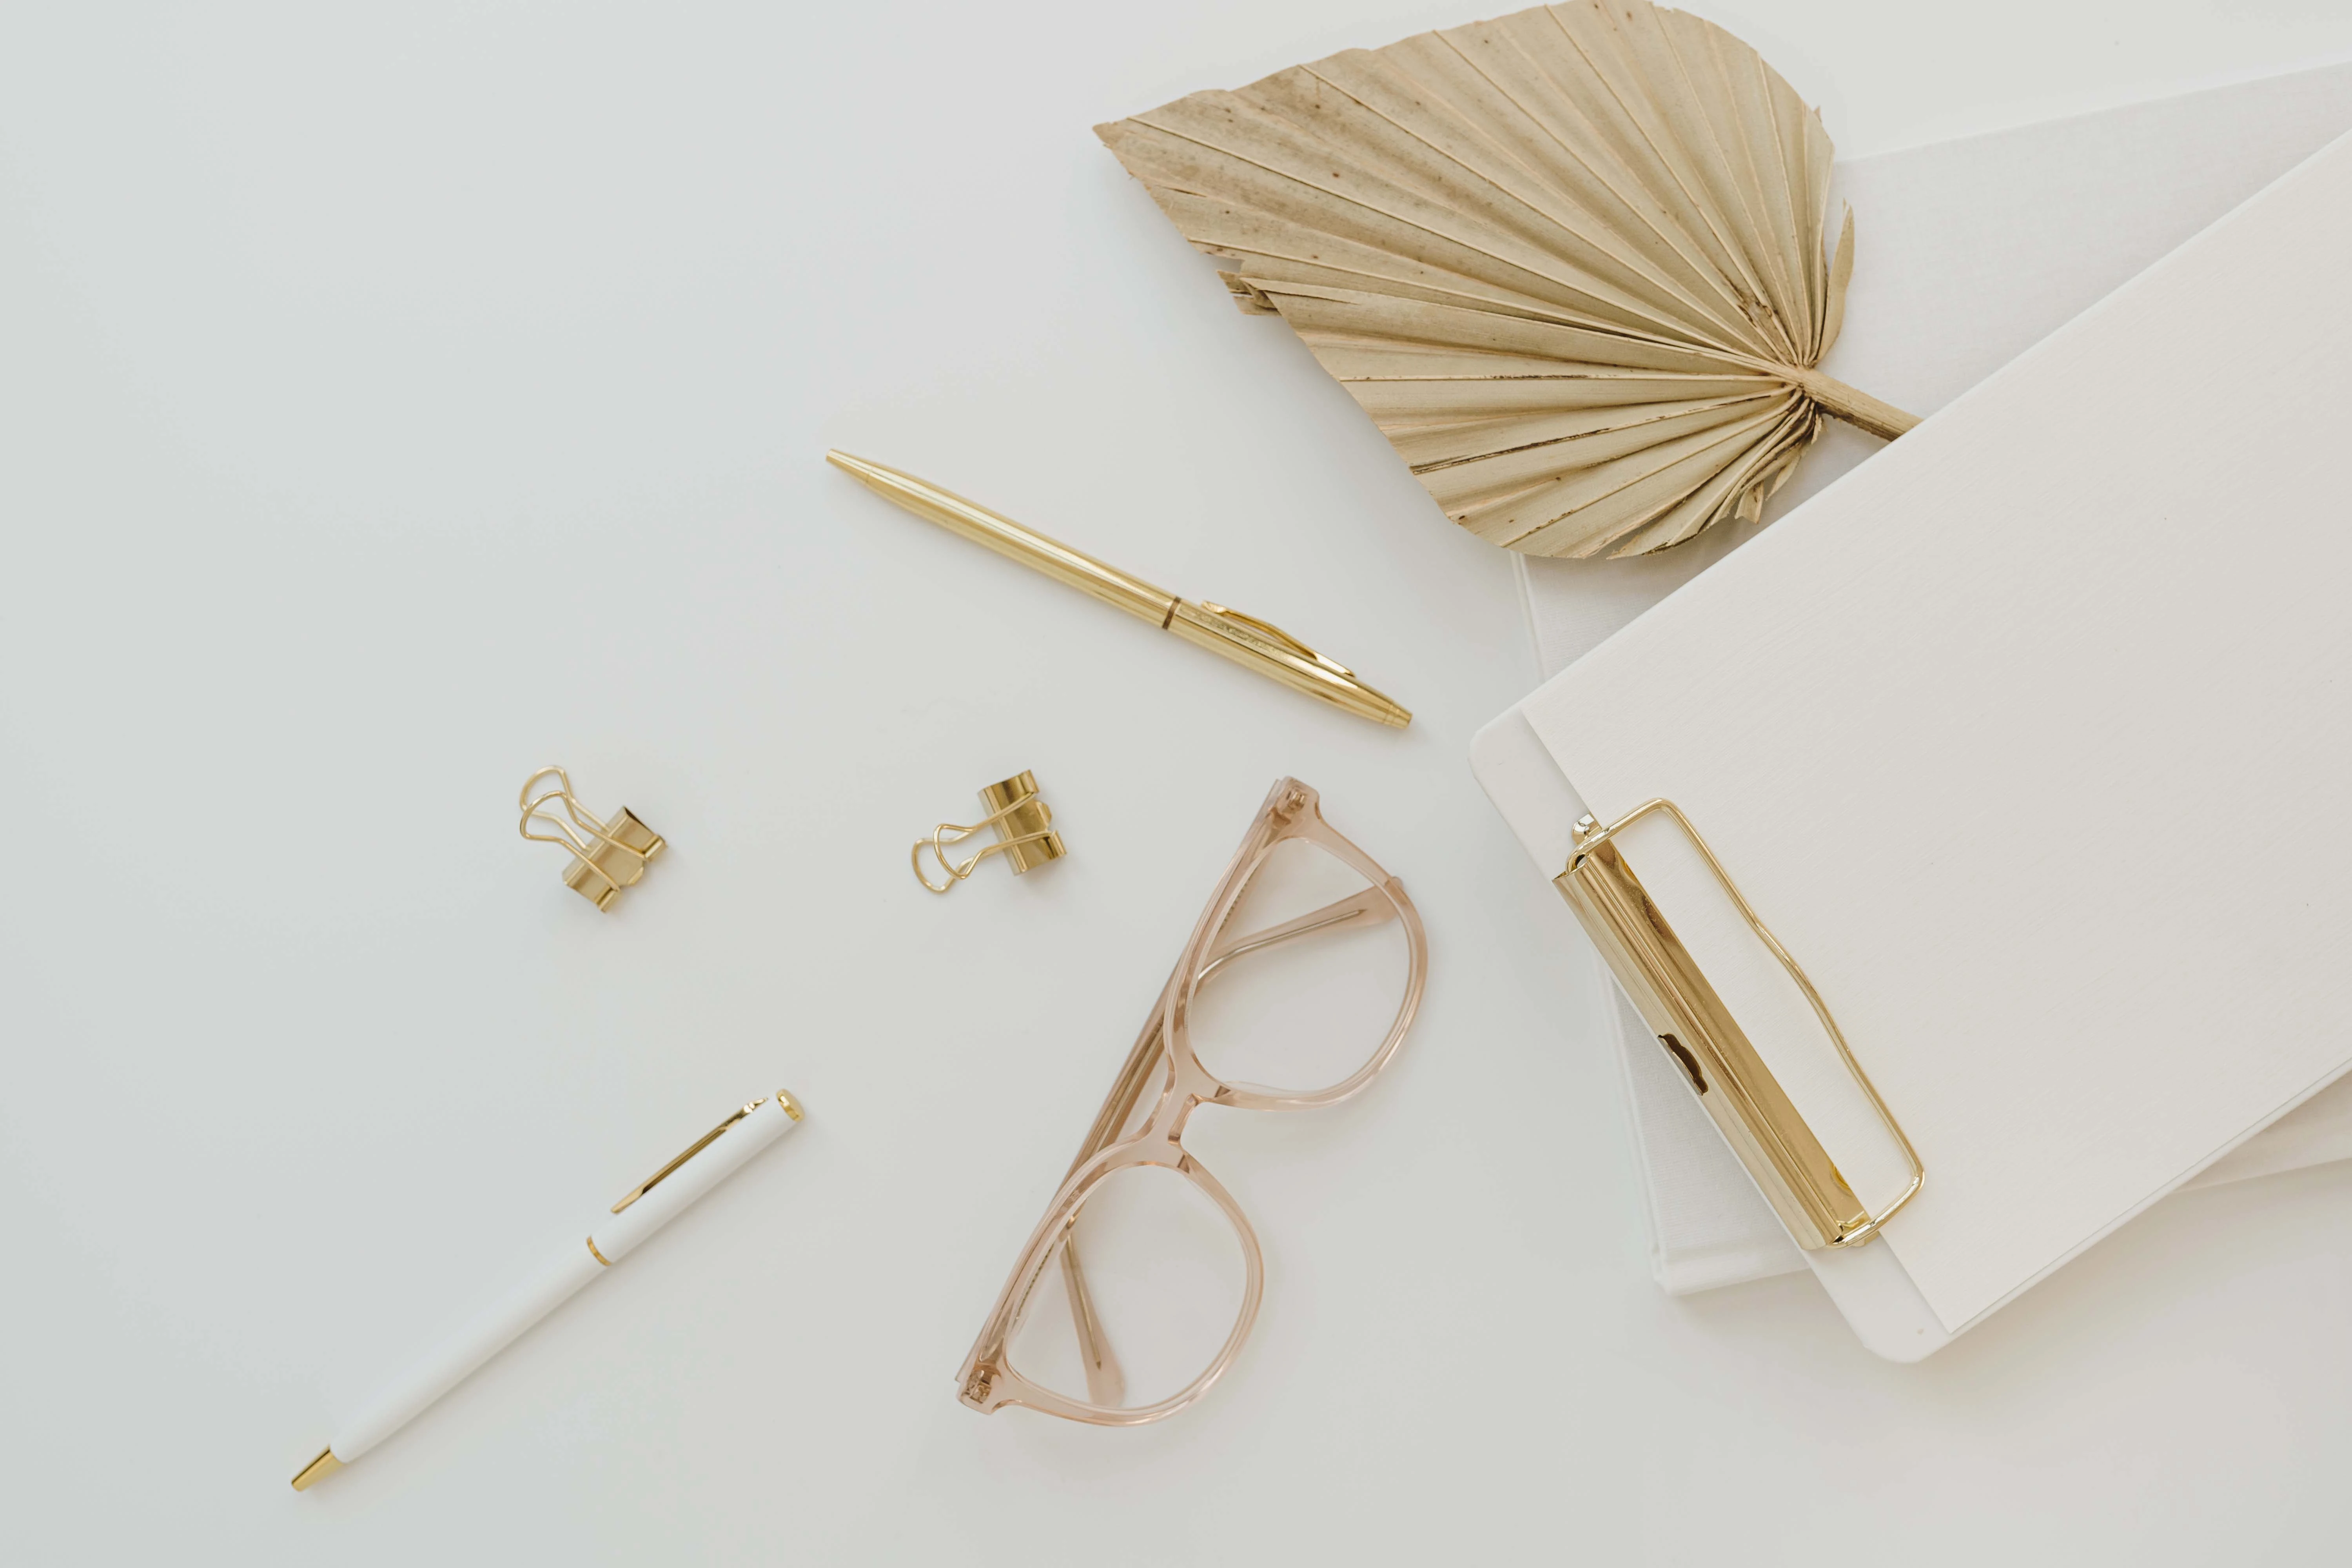 151-r114-fan-leaf-stem-glasses-clipboard-gold-accessories-white-background-with-blank-moc-17048879061948.jpg